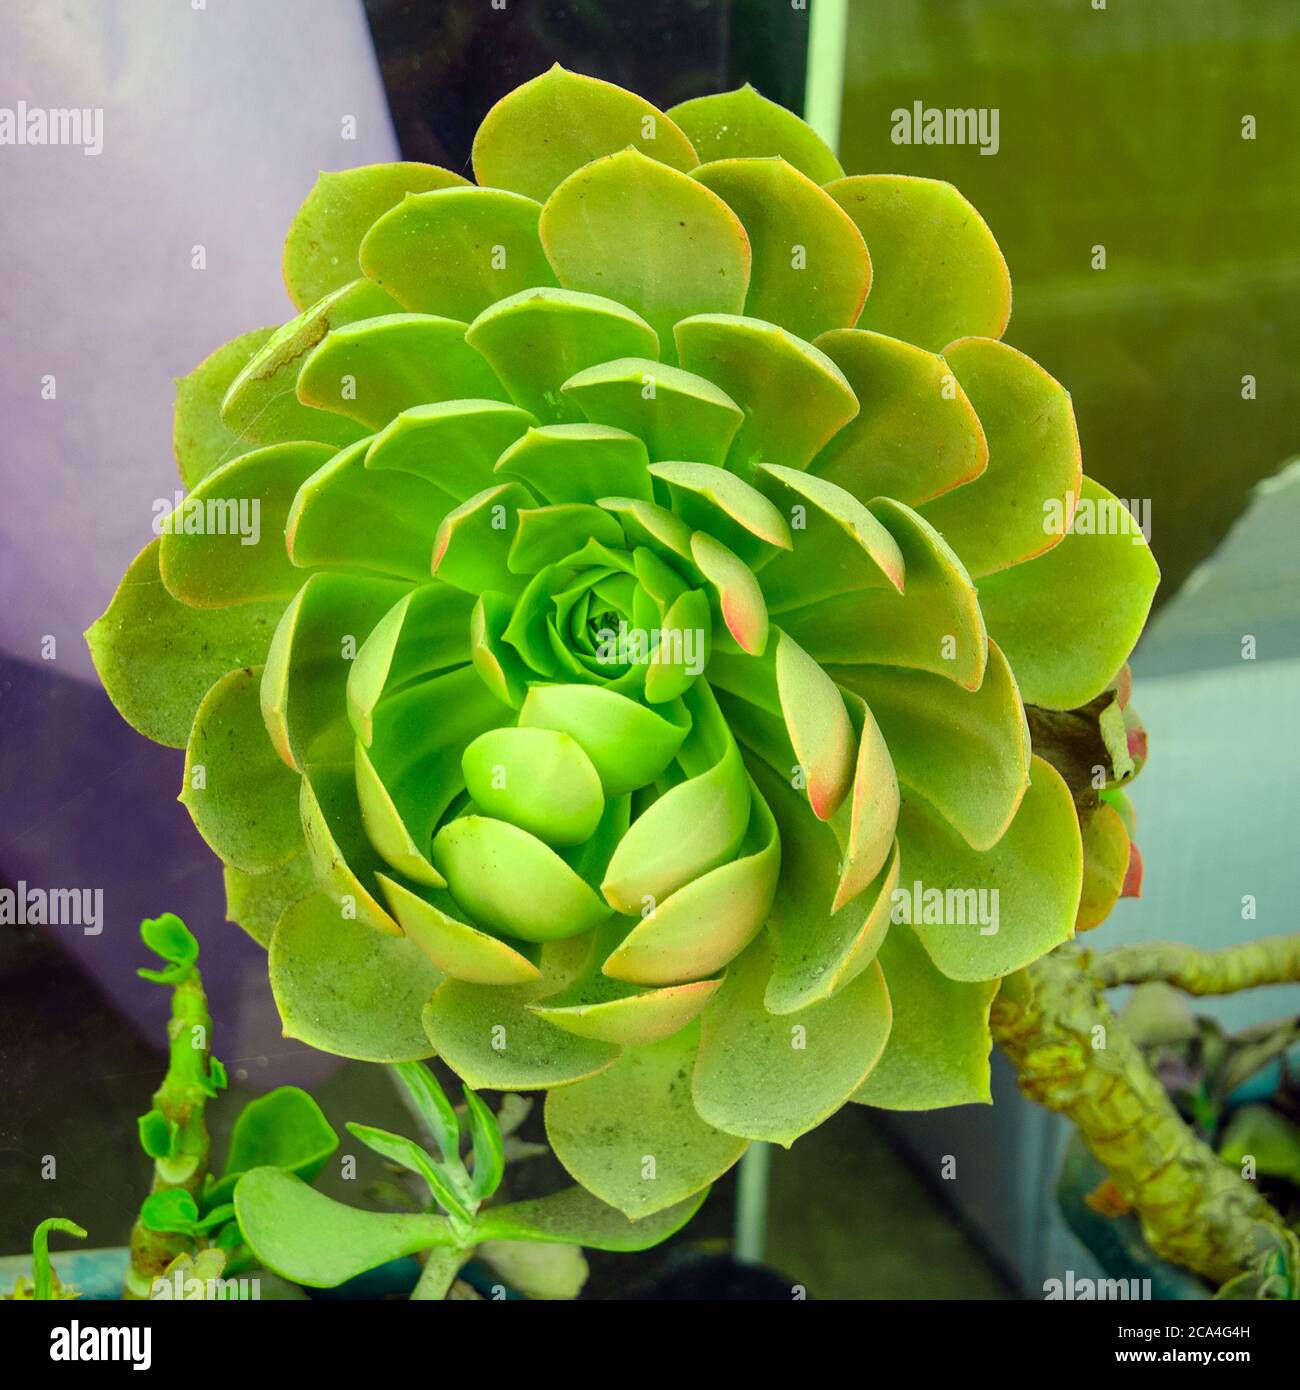 Closeup of a rose shaped growth head of Echeveria succulent plant. Echeveria is a large genus of flowering plants in the family Crassulaceae, native t Stock Photo